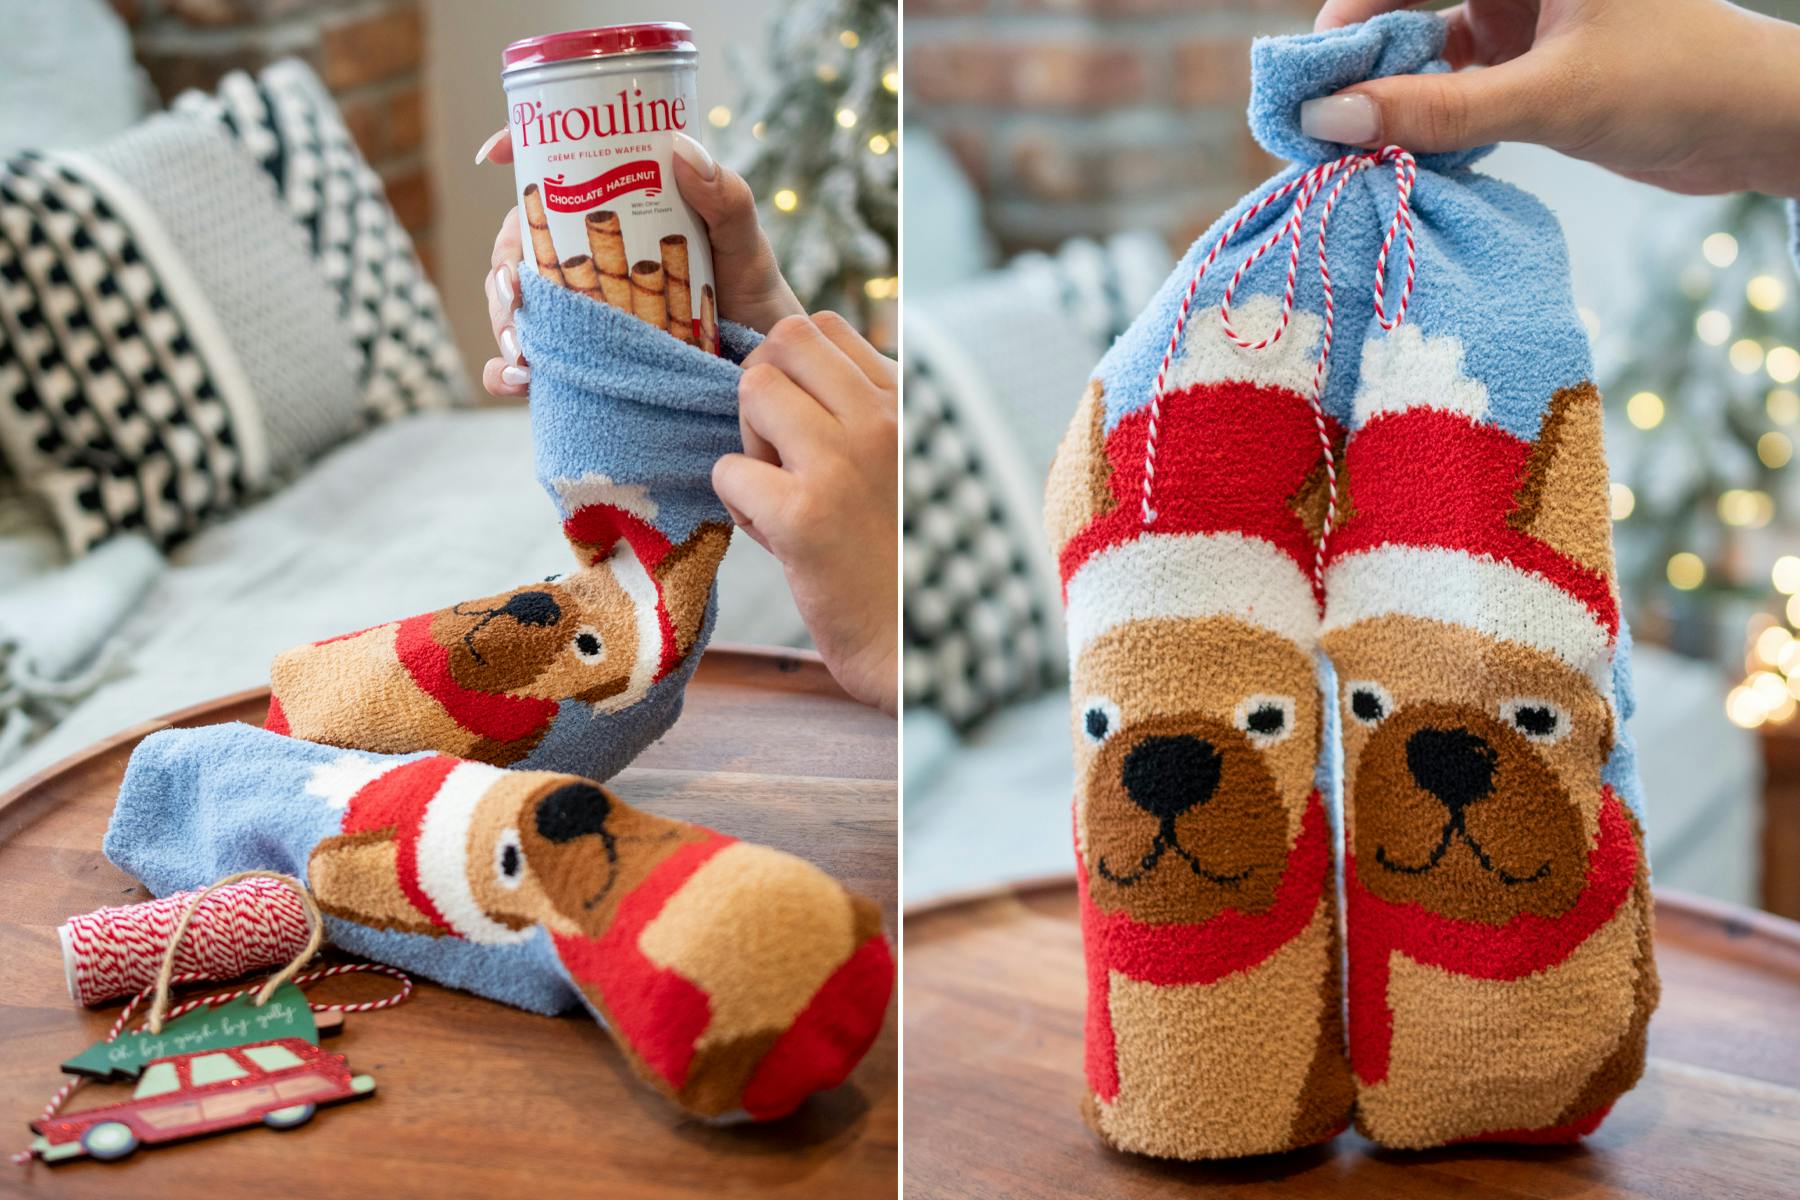 A pair of Christmas socks with dogs on them filled with goodies and tied with a bow